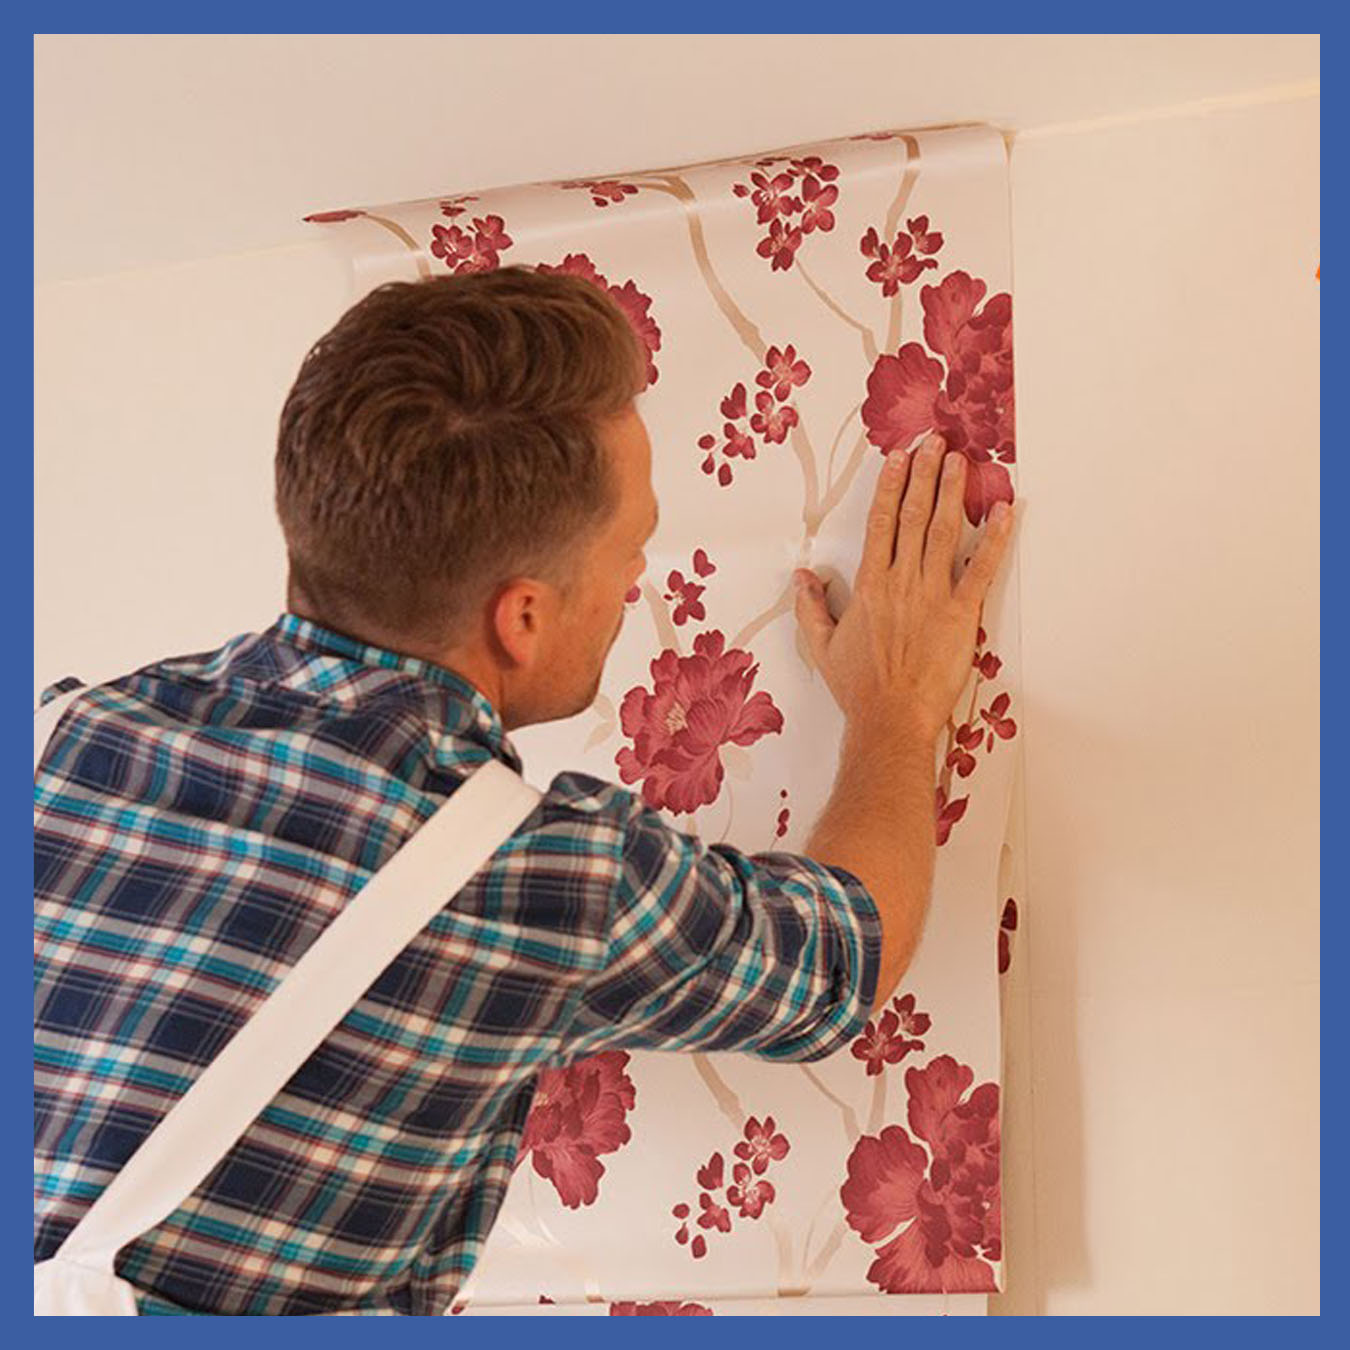 City Express Painting Wallpaper Fixing